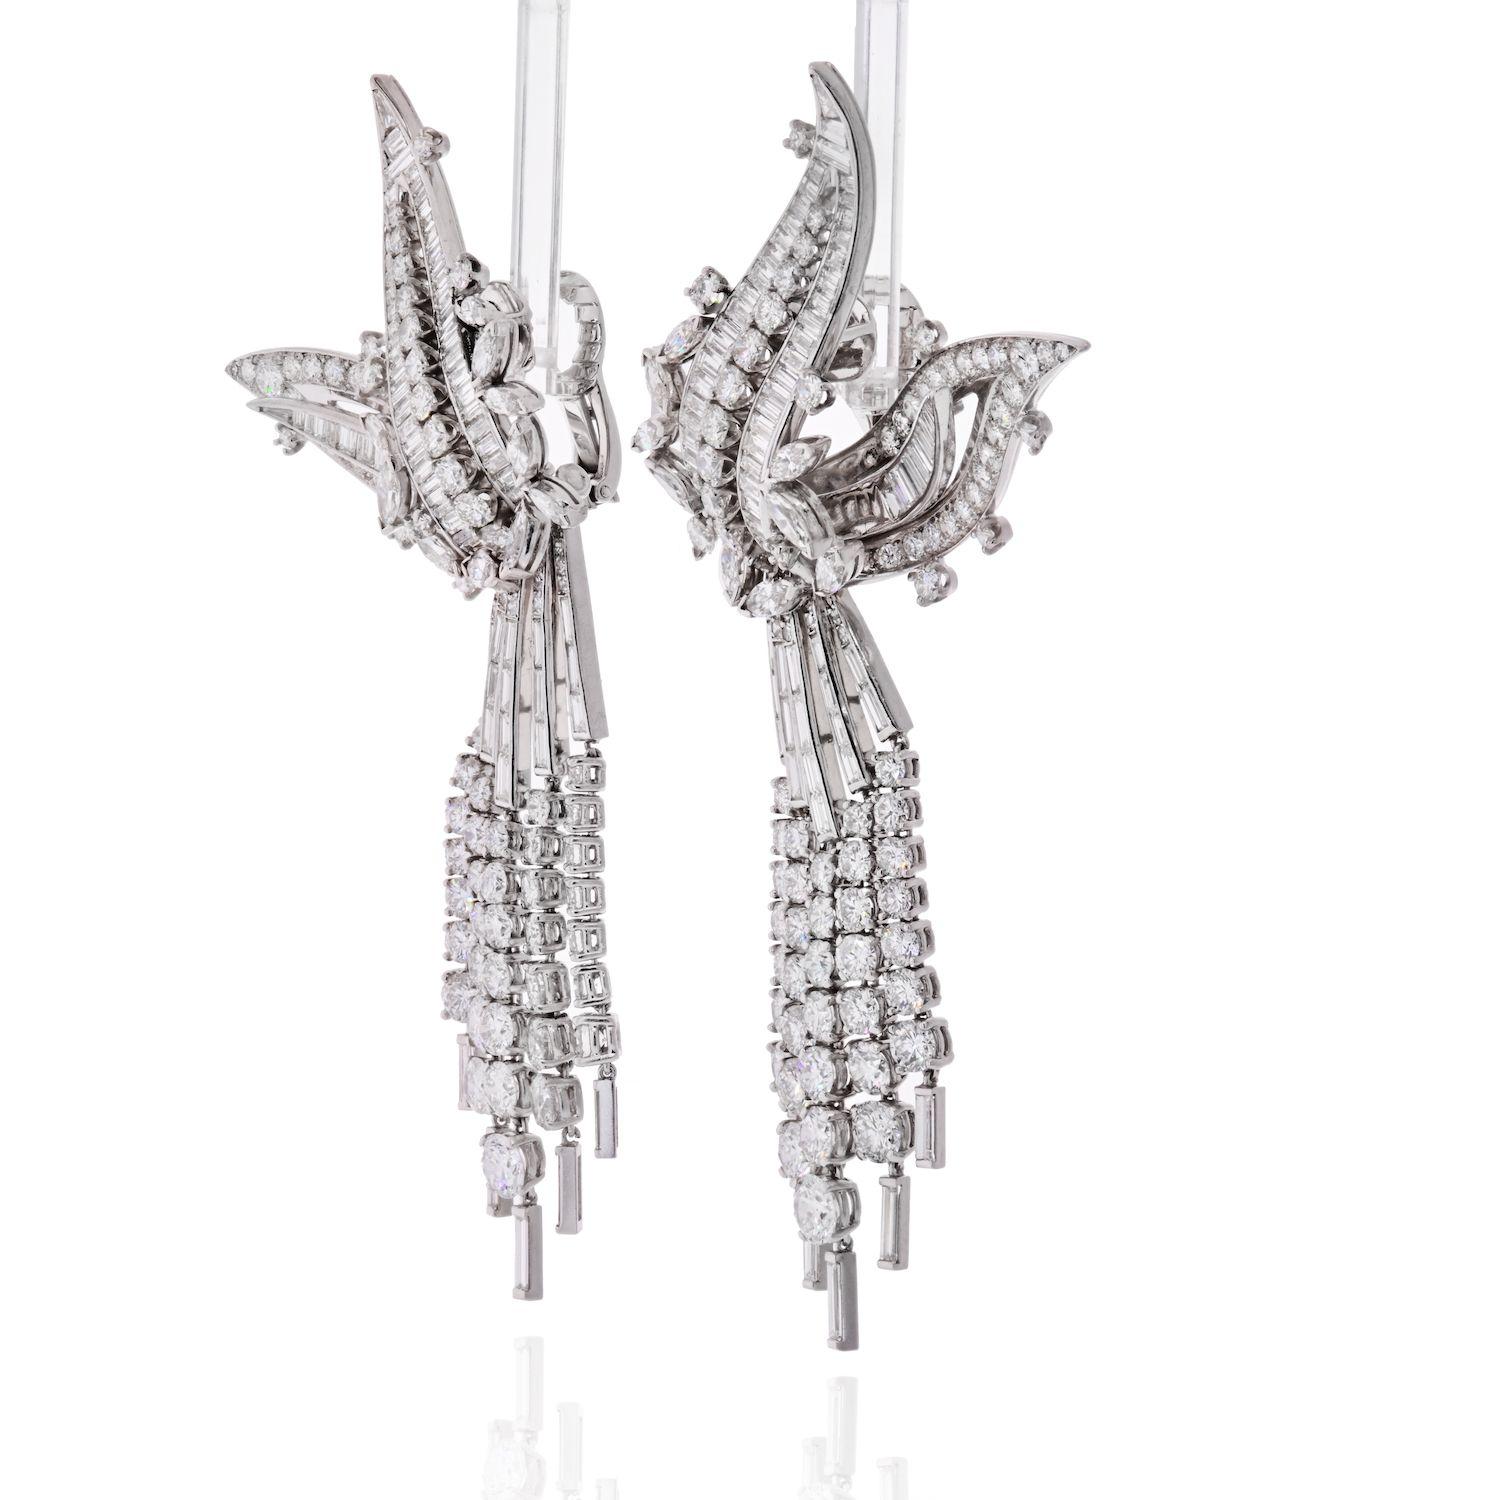 For your best jewelry moment! These are celebrity and red carpet Day & Night diamond earrings by David Webb!
Crafted in Platinum and white gold these are truly a superb work of art. Absolutely magnificent on the ear with shimmering 50 carat of